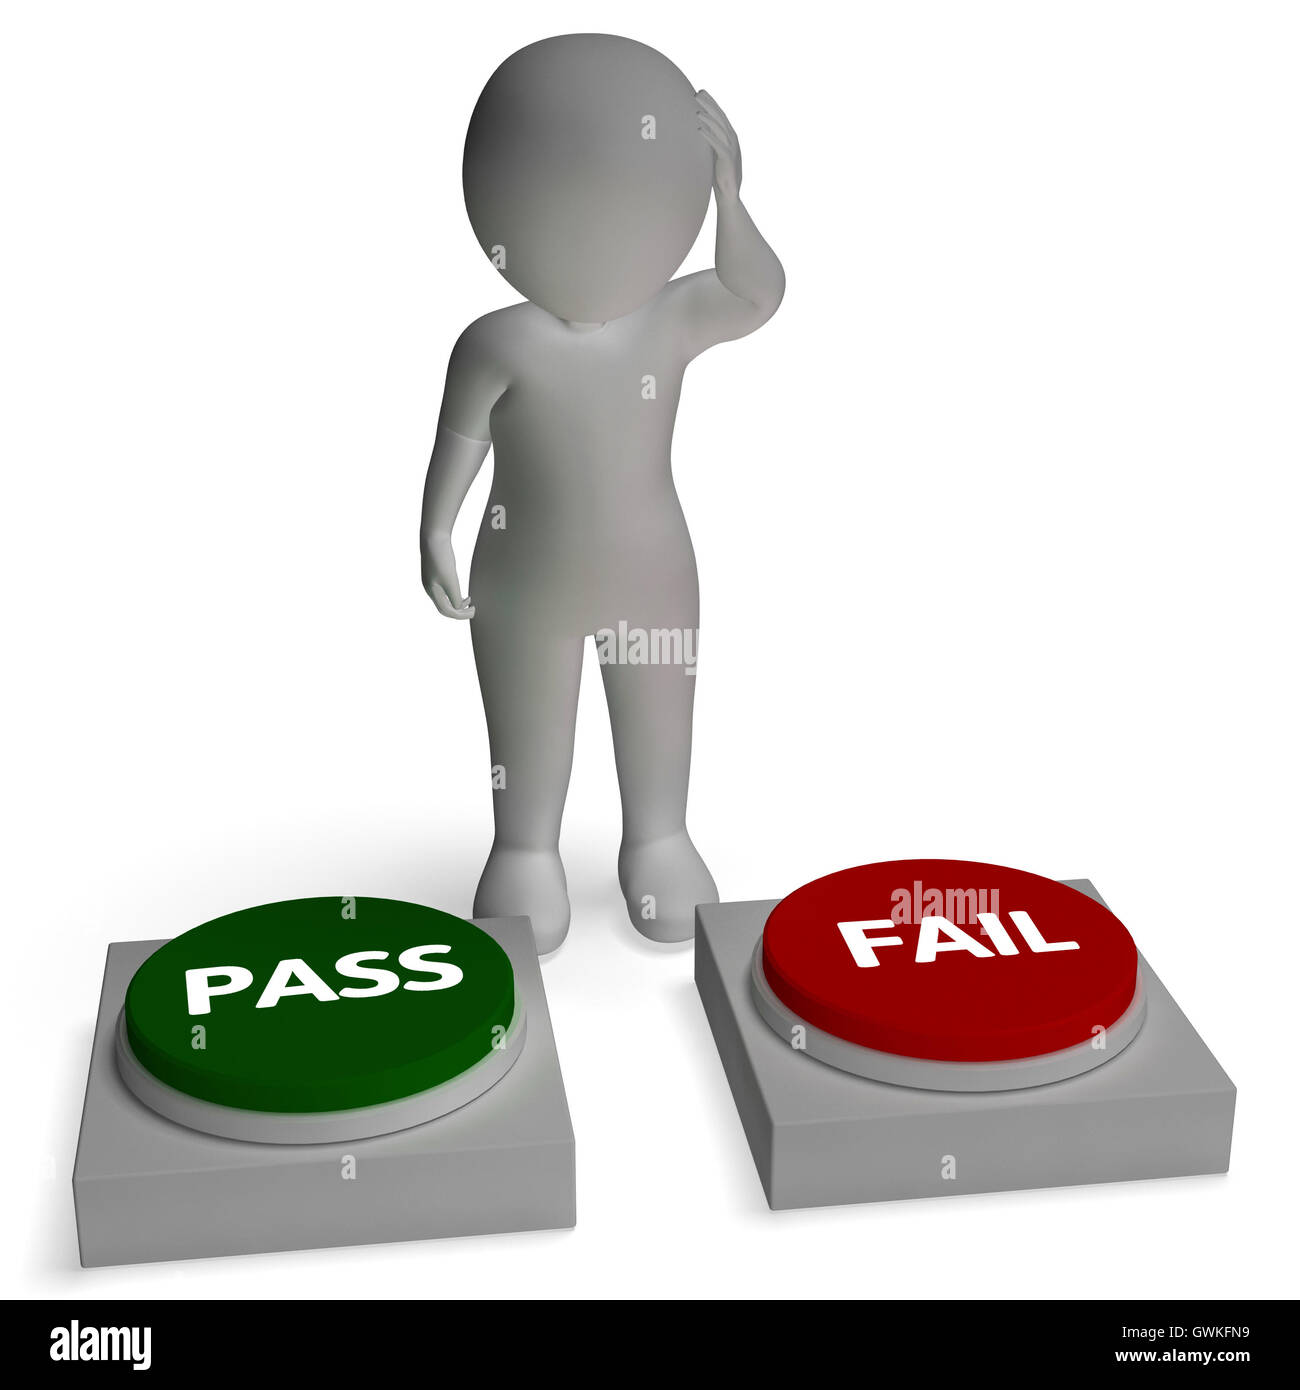 Pass Fail Buttons Shows Passing Or Failing Stock Photo